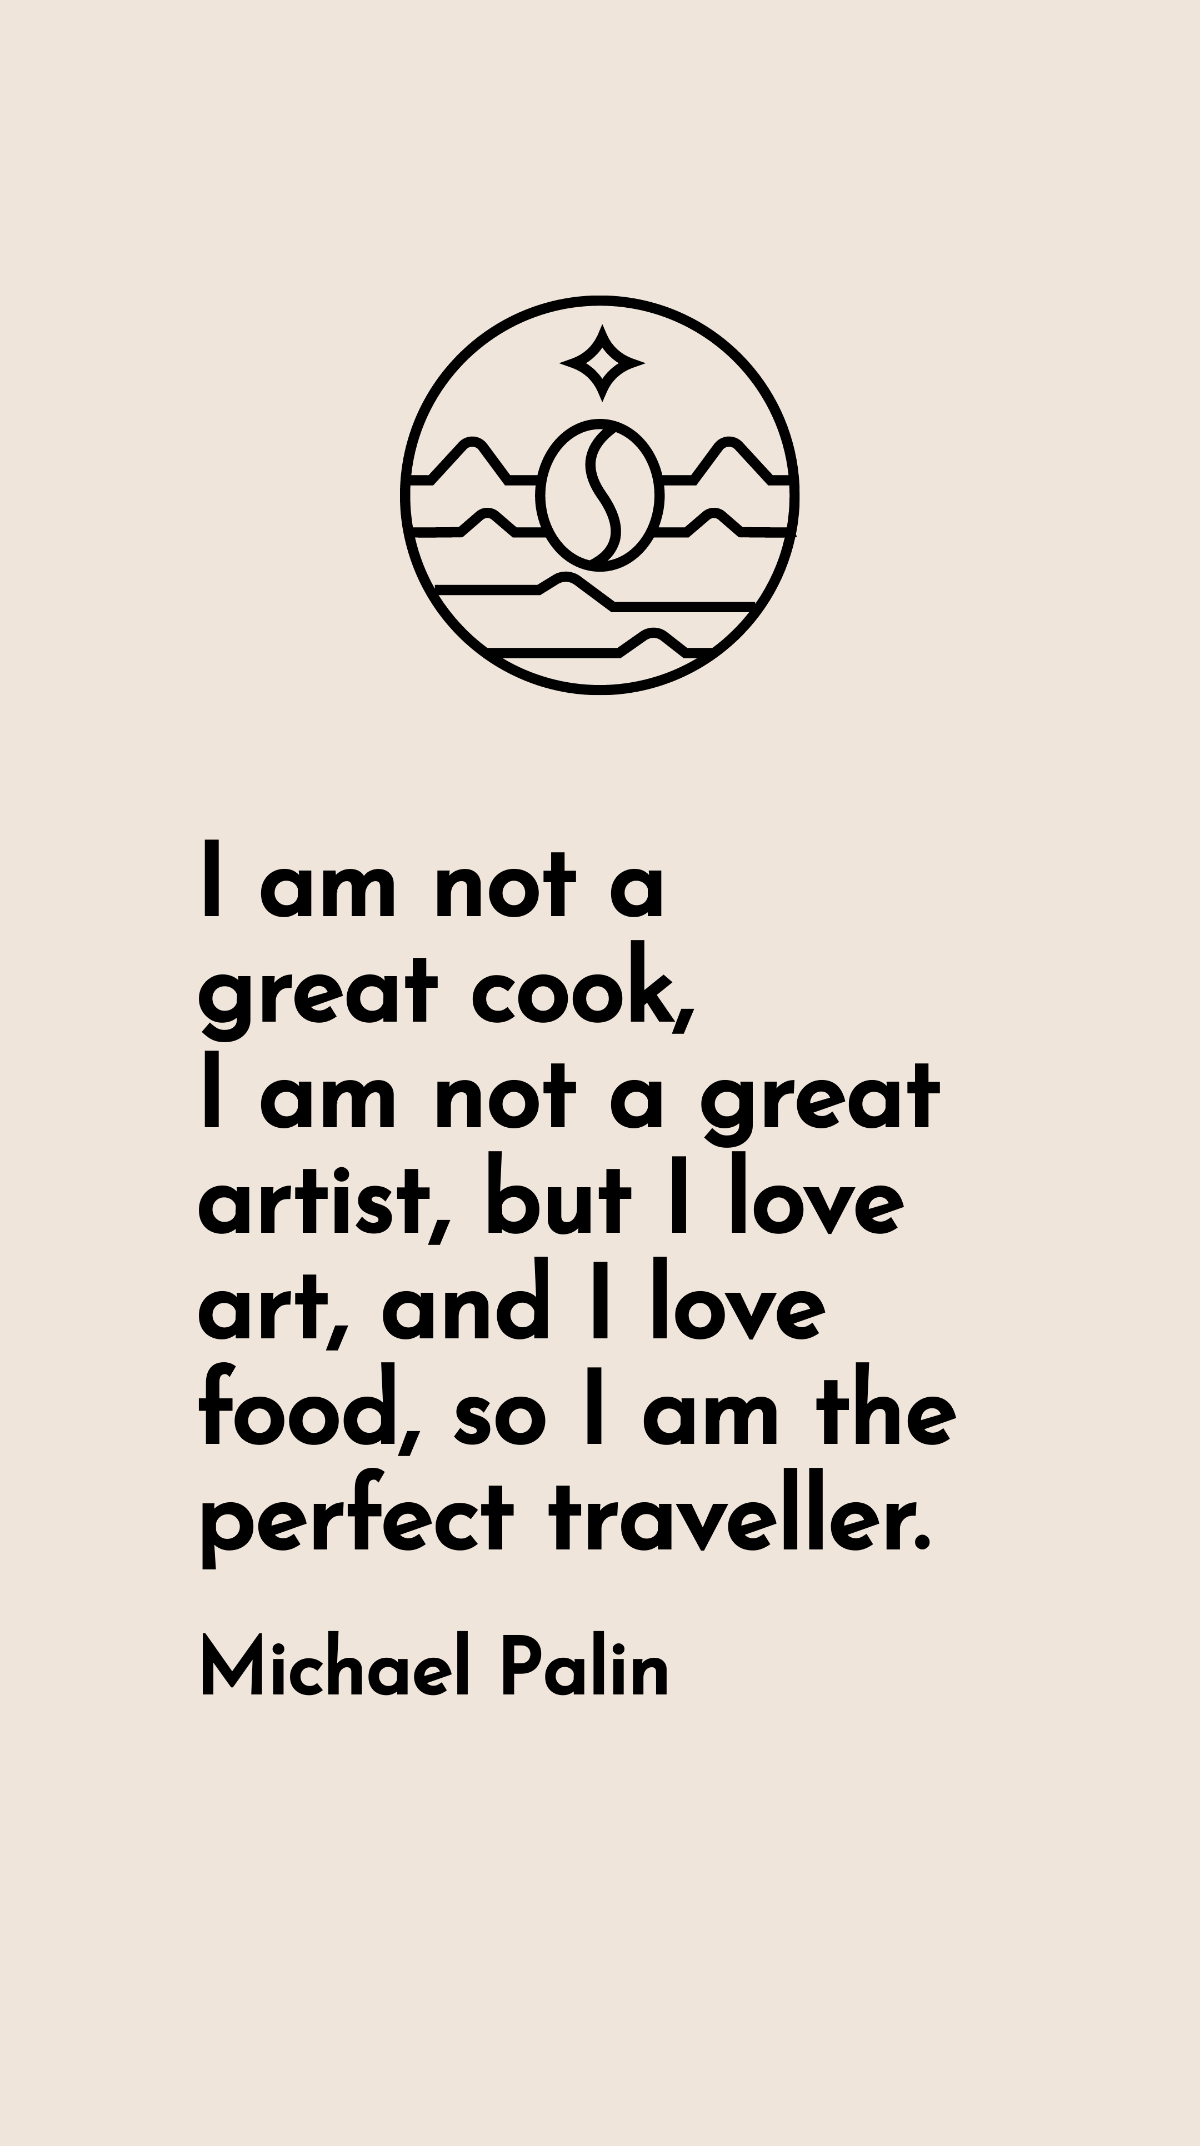 Michael Palin - I am not a great cook, I am not a great artist, but I love art, and I love food, so I am the perfect traveller. Template